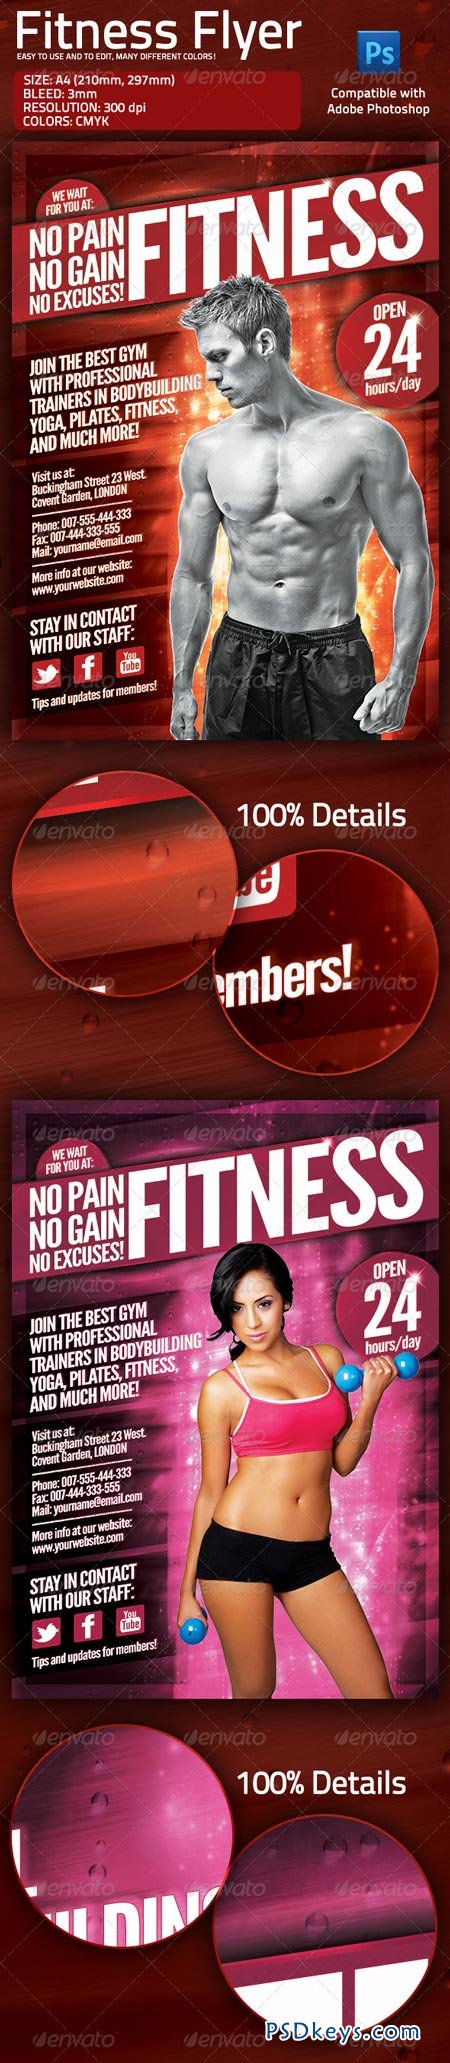 Fitness Gym Flyer with Multiple Color Options 1715942